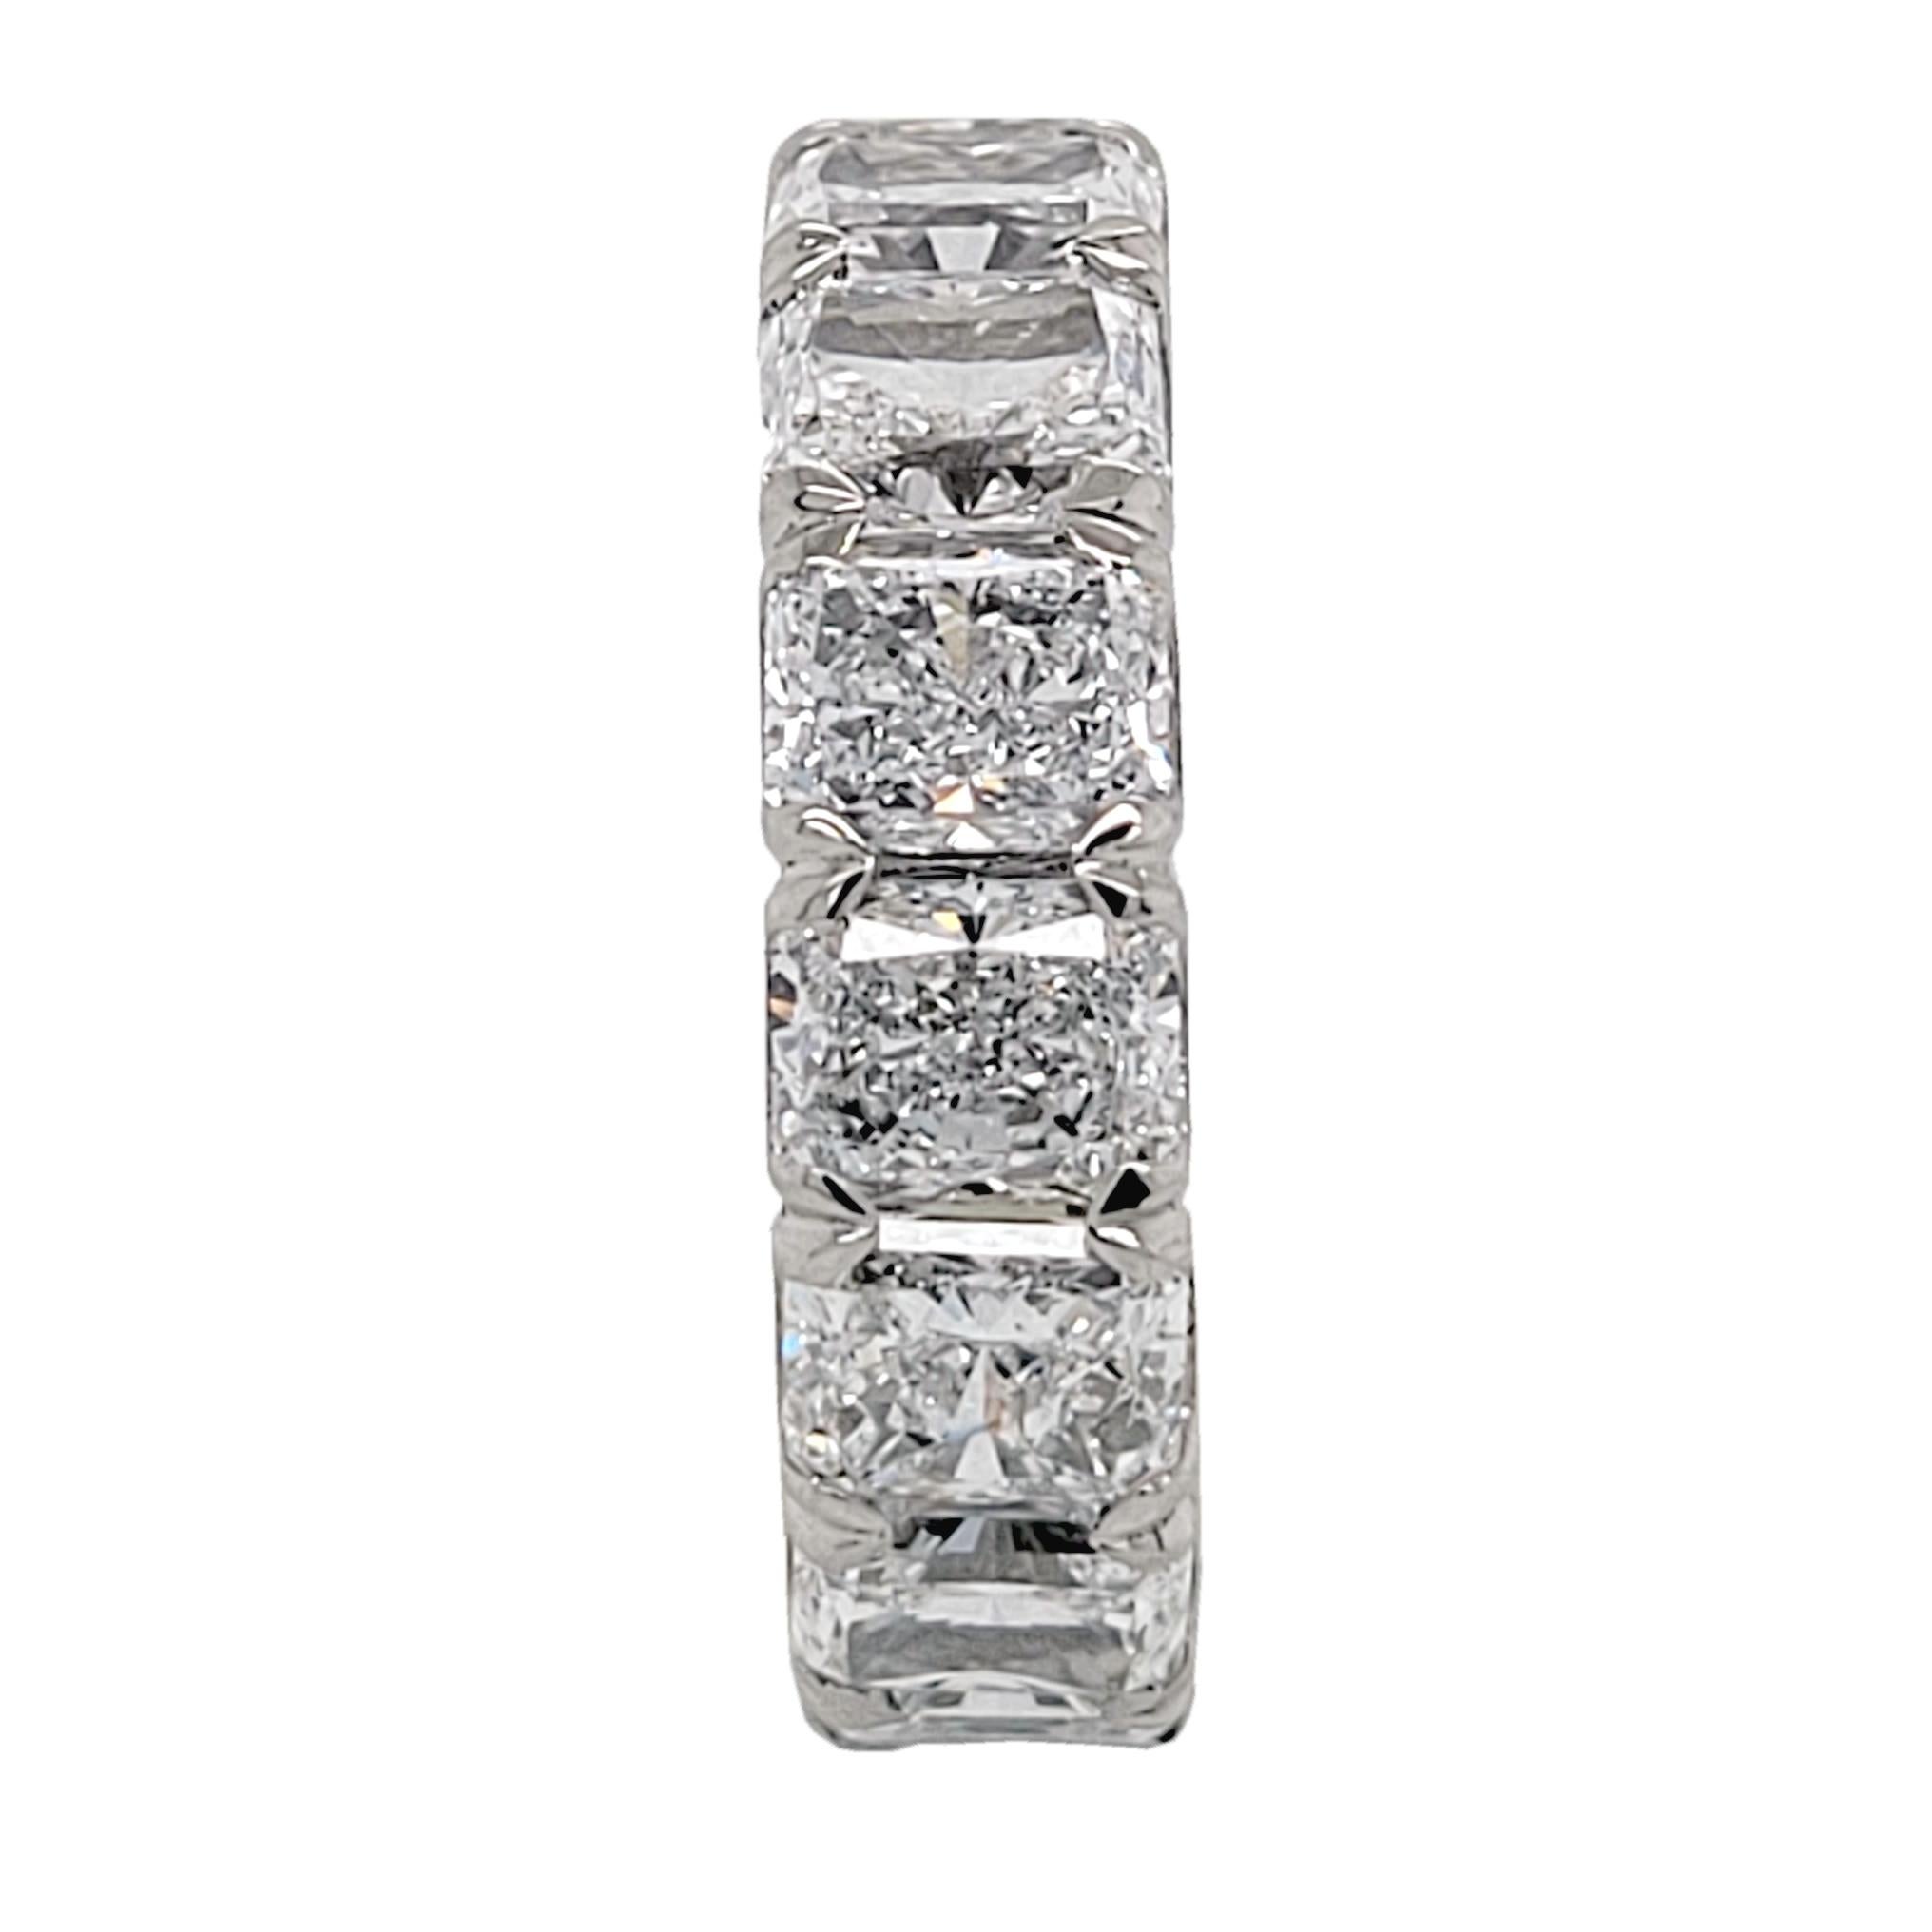 This beautiful Eternity Ring is made of Platinum showcasing 15 perfectly matched GIA Certified  (VVS2-VS2/D-F)  0.70 Ct Radiant Diamonds Set in Shared Prong Mode.
6 diamonds are D Color, 3 are E Color and 6 are F Color
3 diamonds are VVS2 Clarity, 4